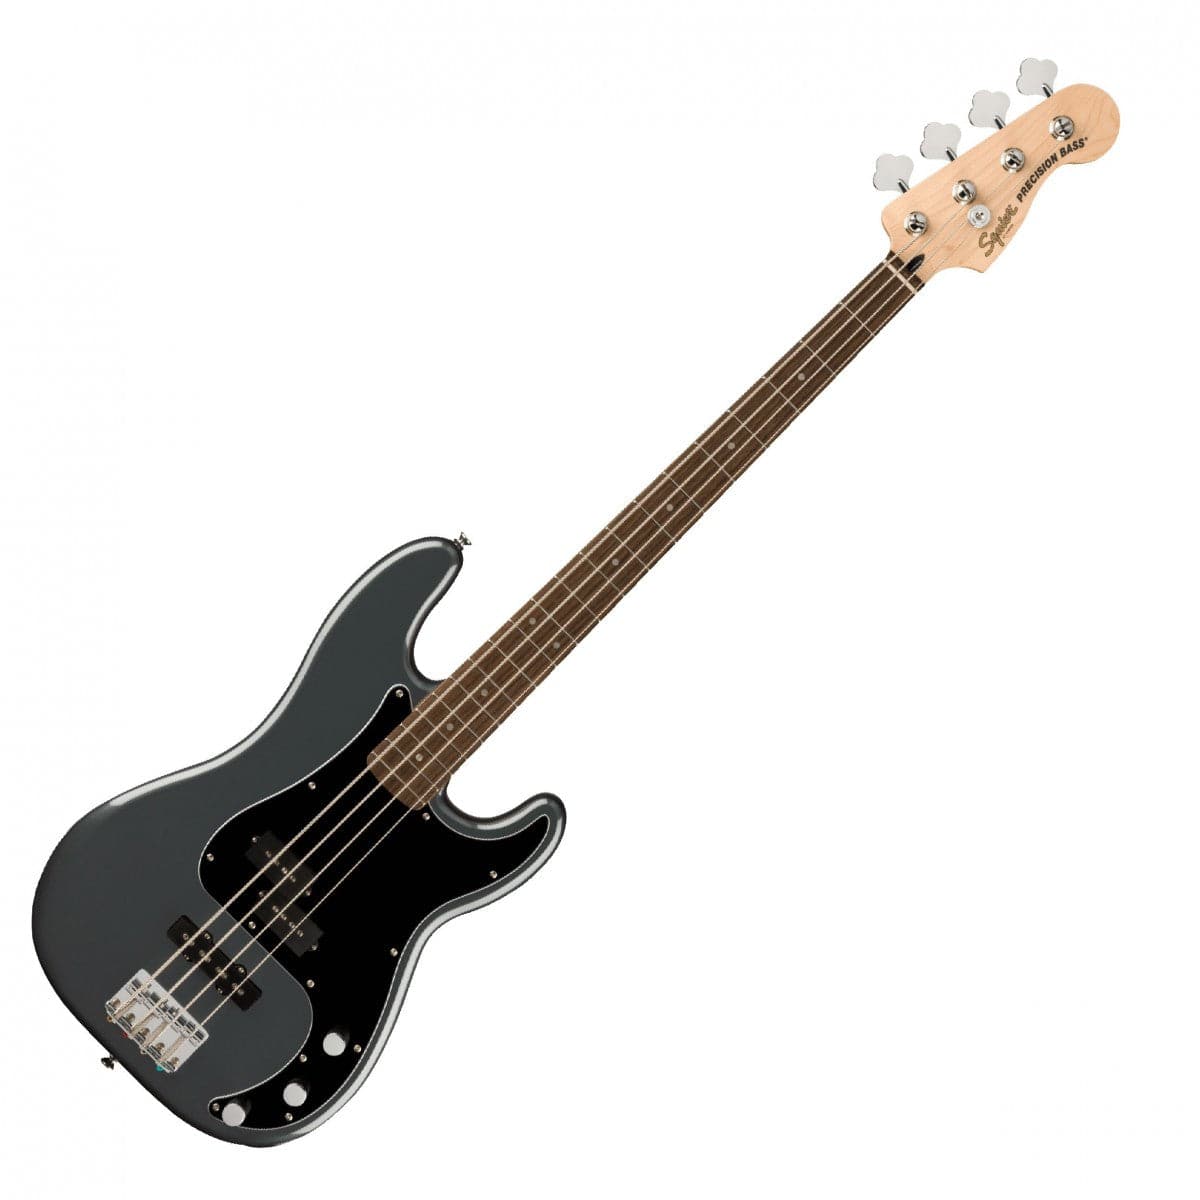 Squier Affinity Precision PJ Bass - Charcoal Frost Metallic